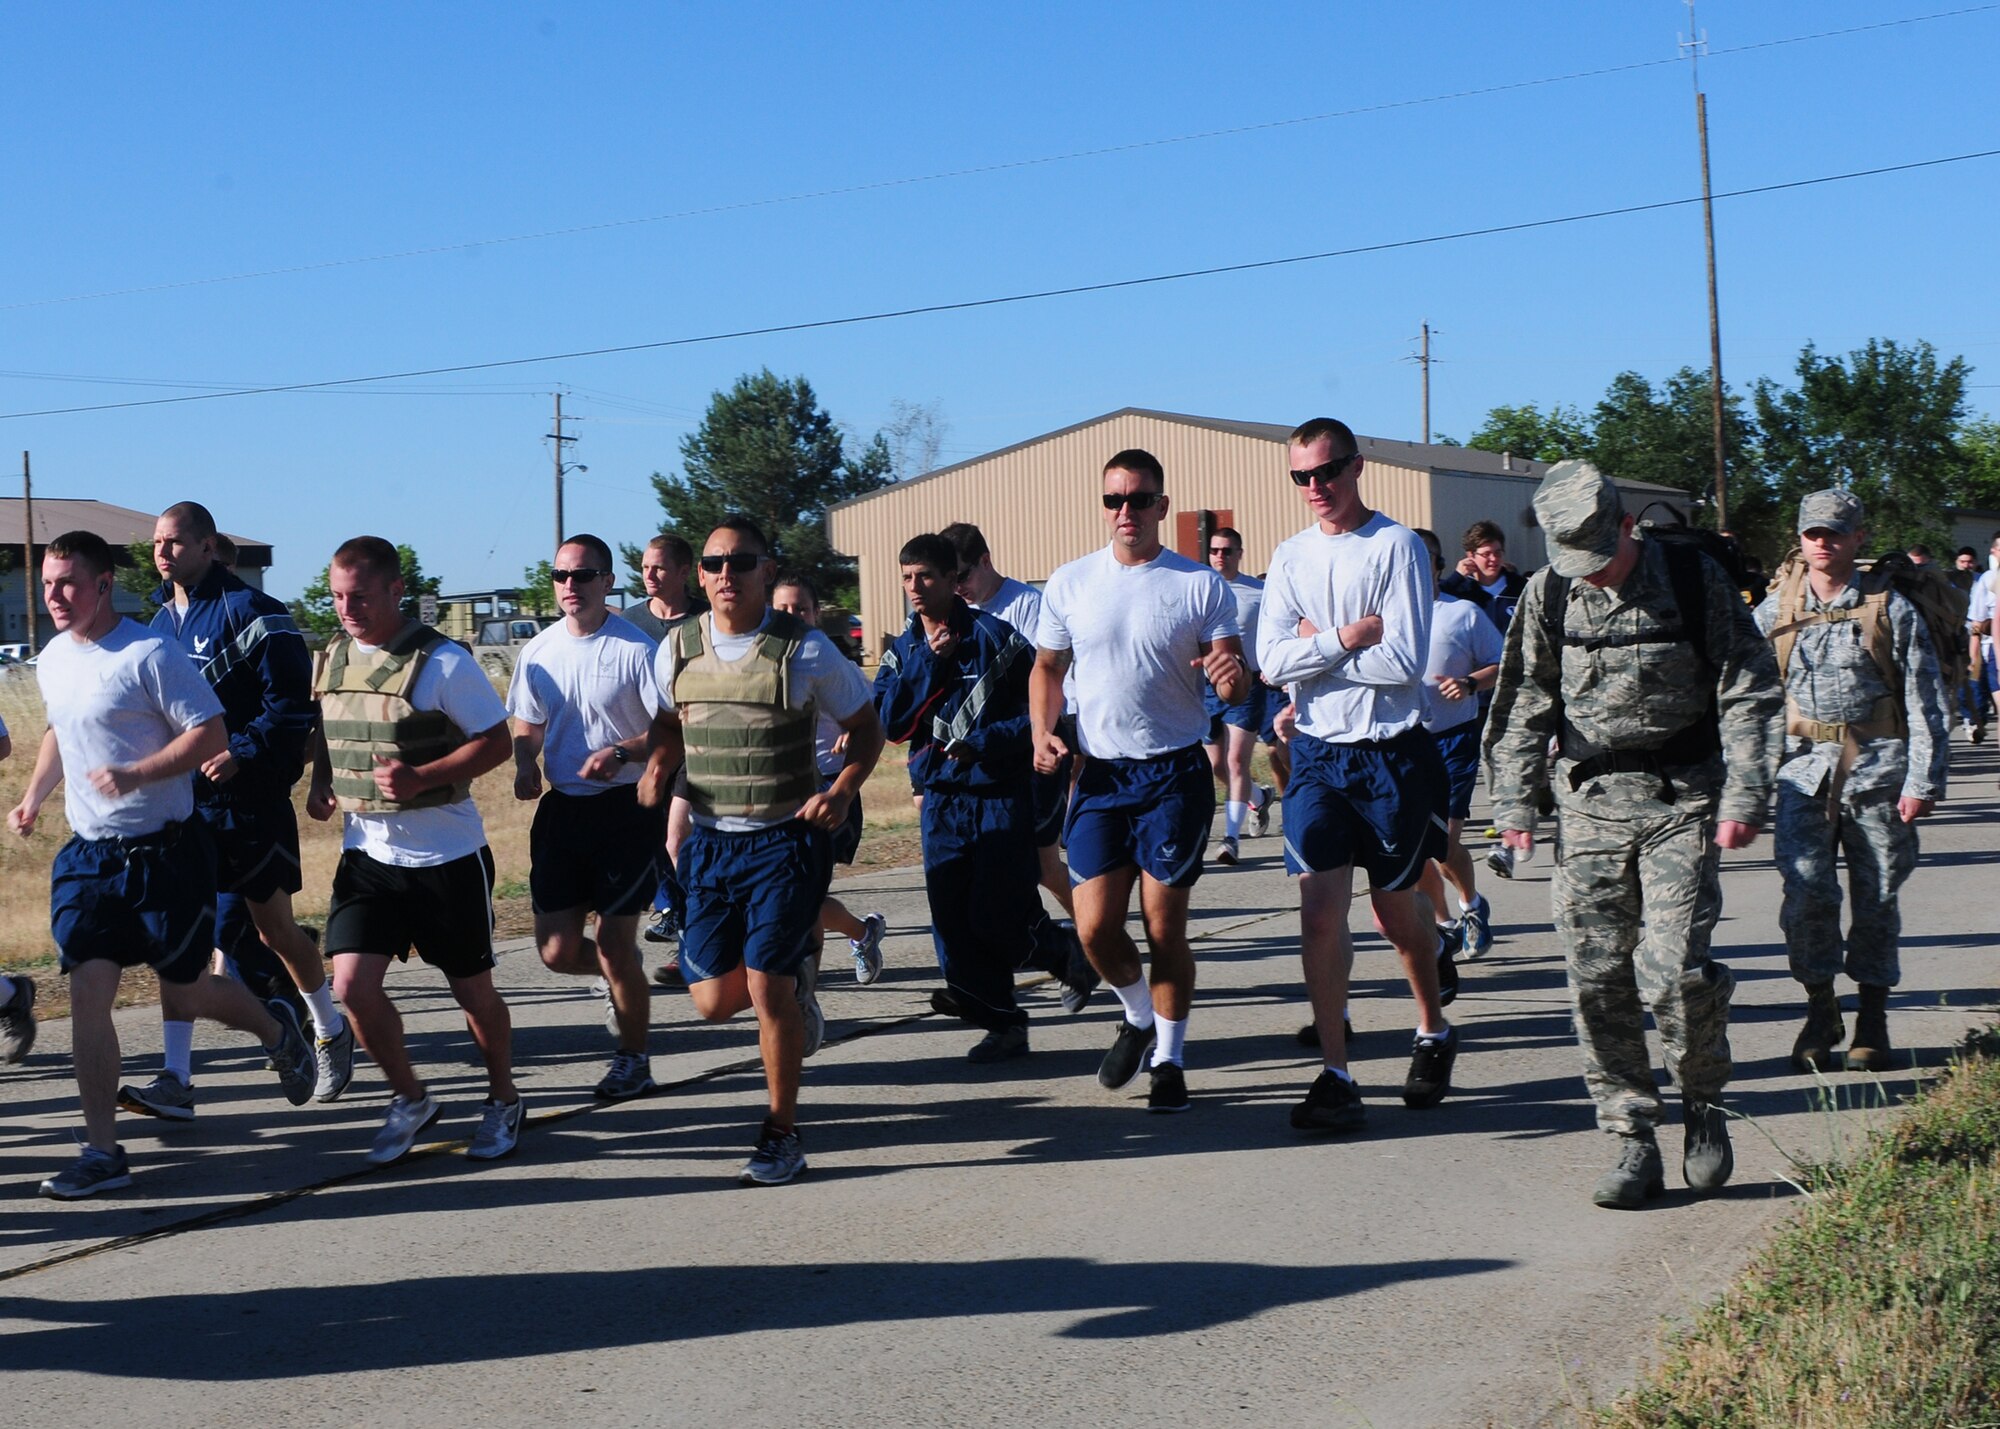 Members of Team Beale run during the Explosive Ordnance Disposal memorial run at Beale Air Force Base, Calif., May 22, 2013. Airmen and their families could run, ruck-march or walk the 4.1 mile course. (U.S. Air Force photo by Senior Airman Allen Pollard/Released)